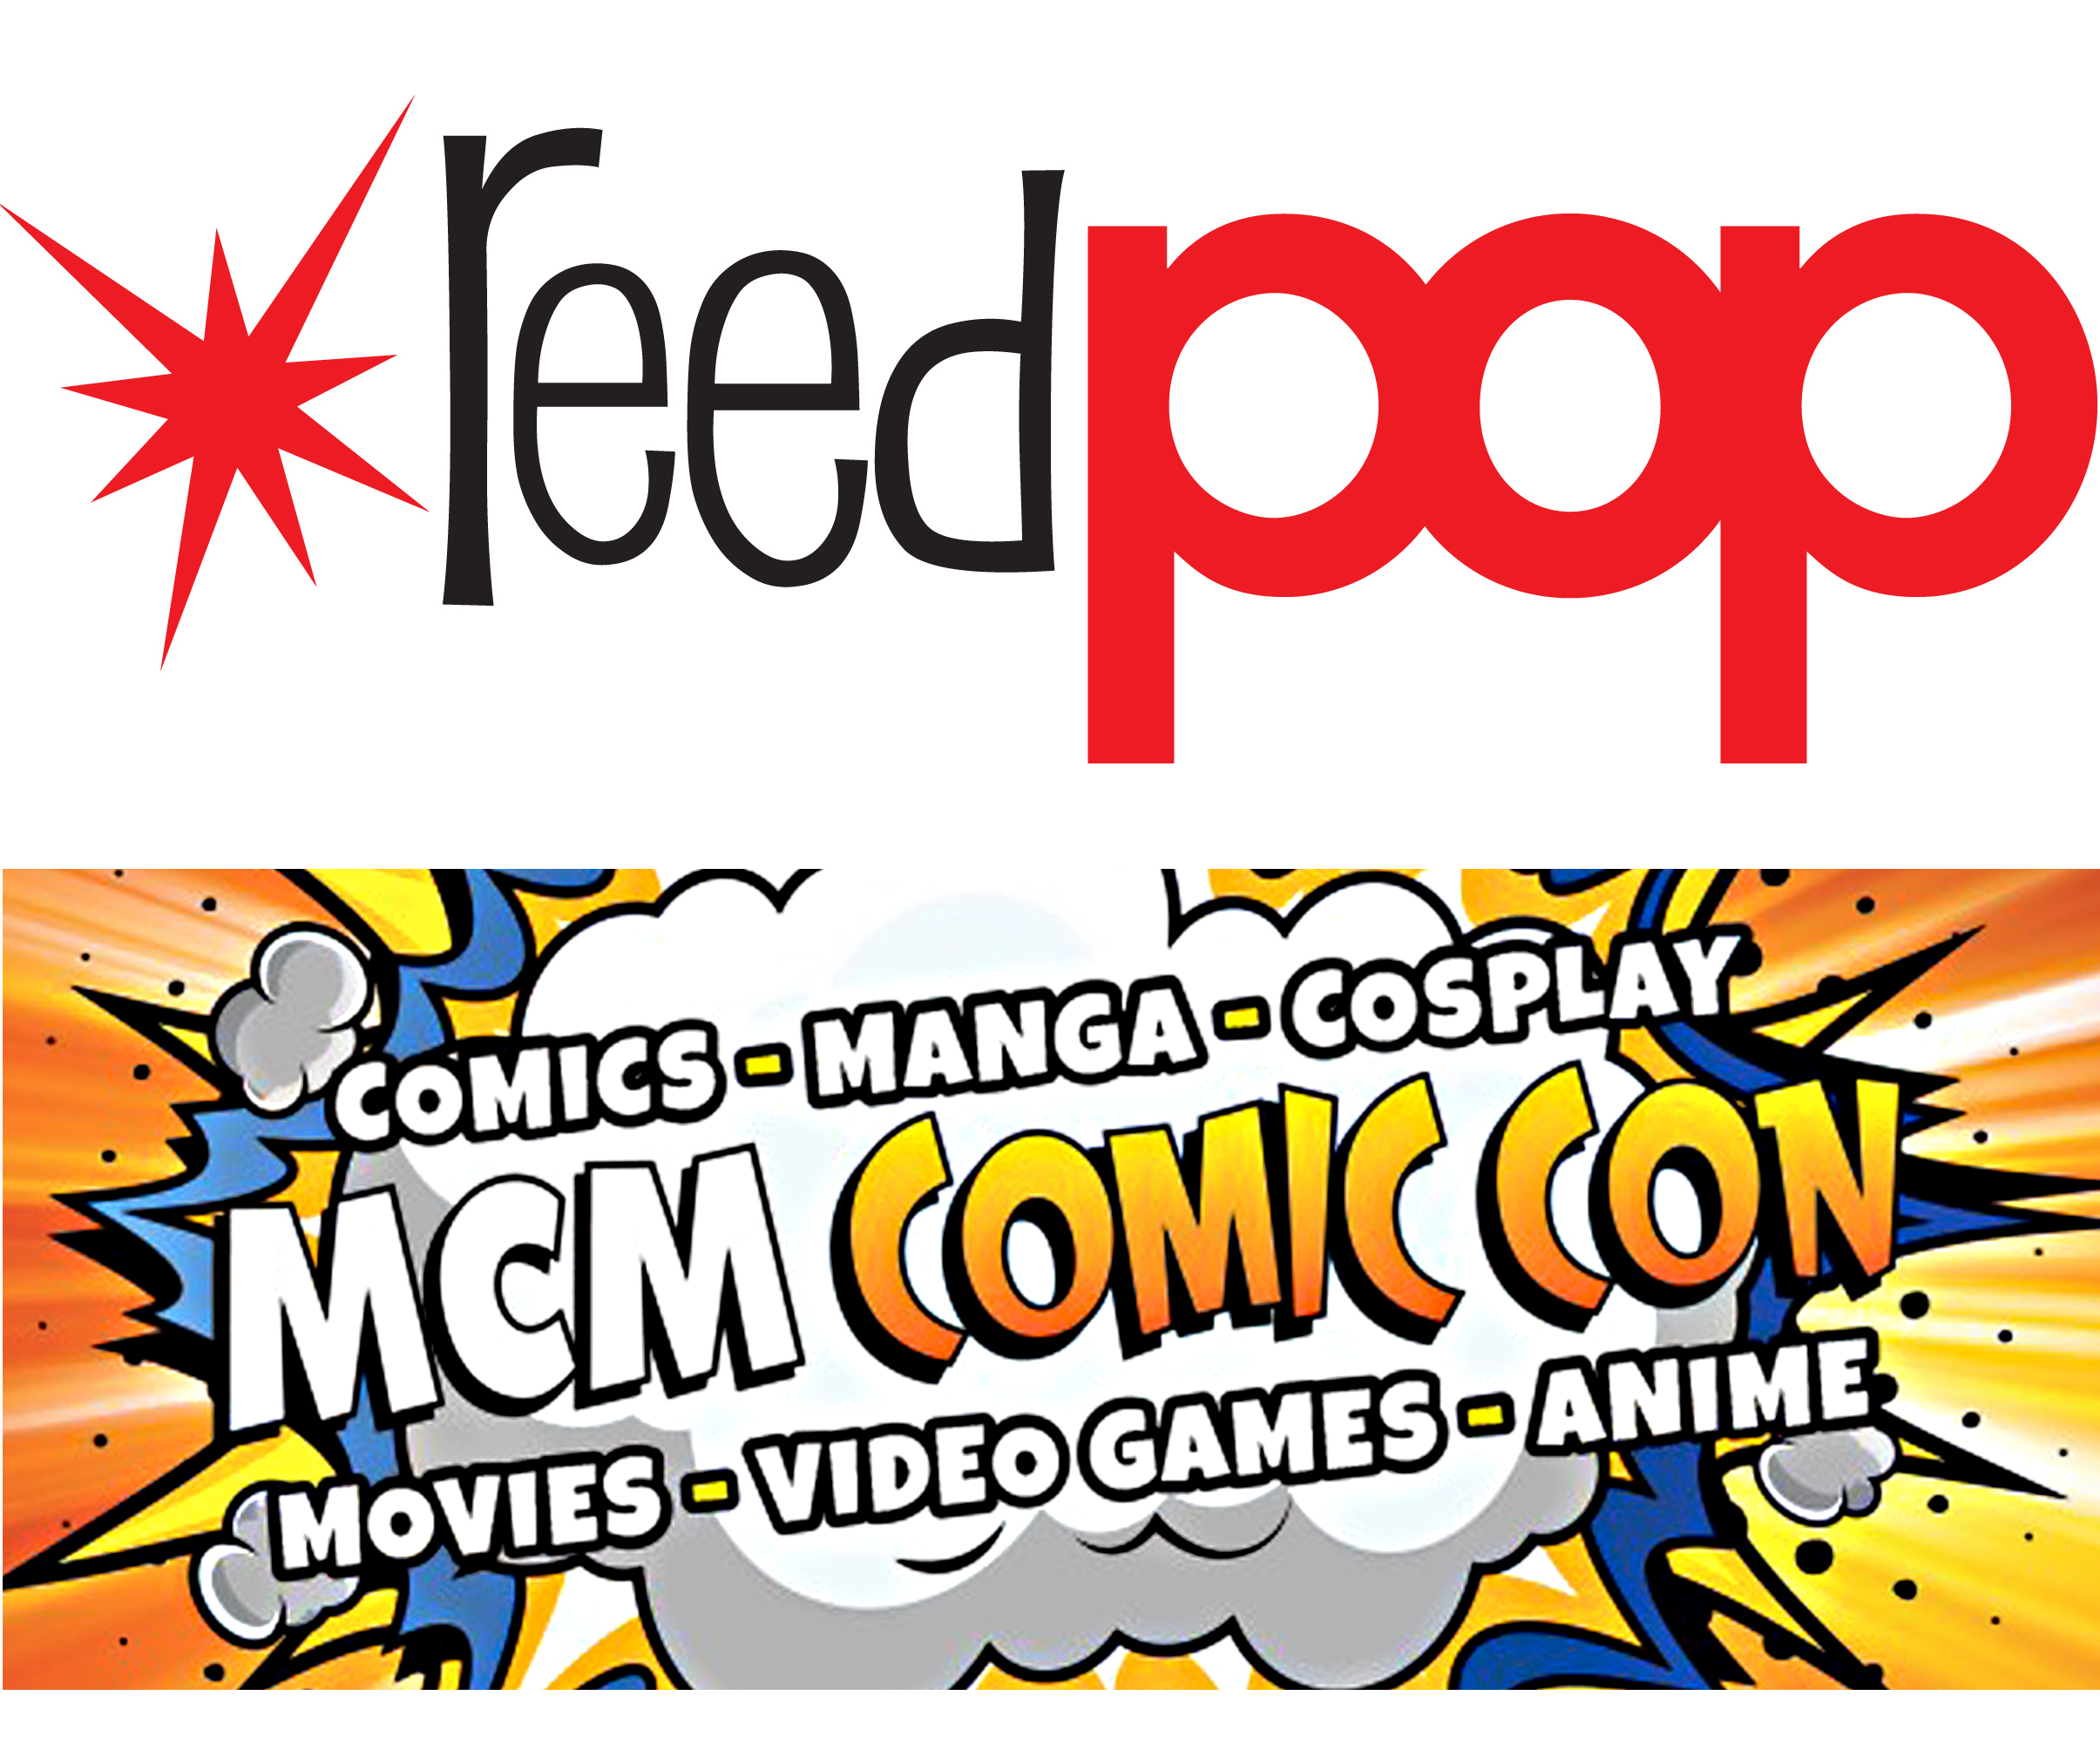 News: ReedPOP and MCM Comic Con join forces.